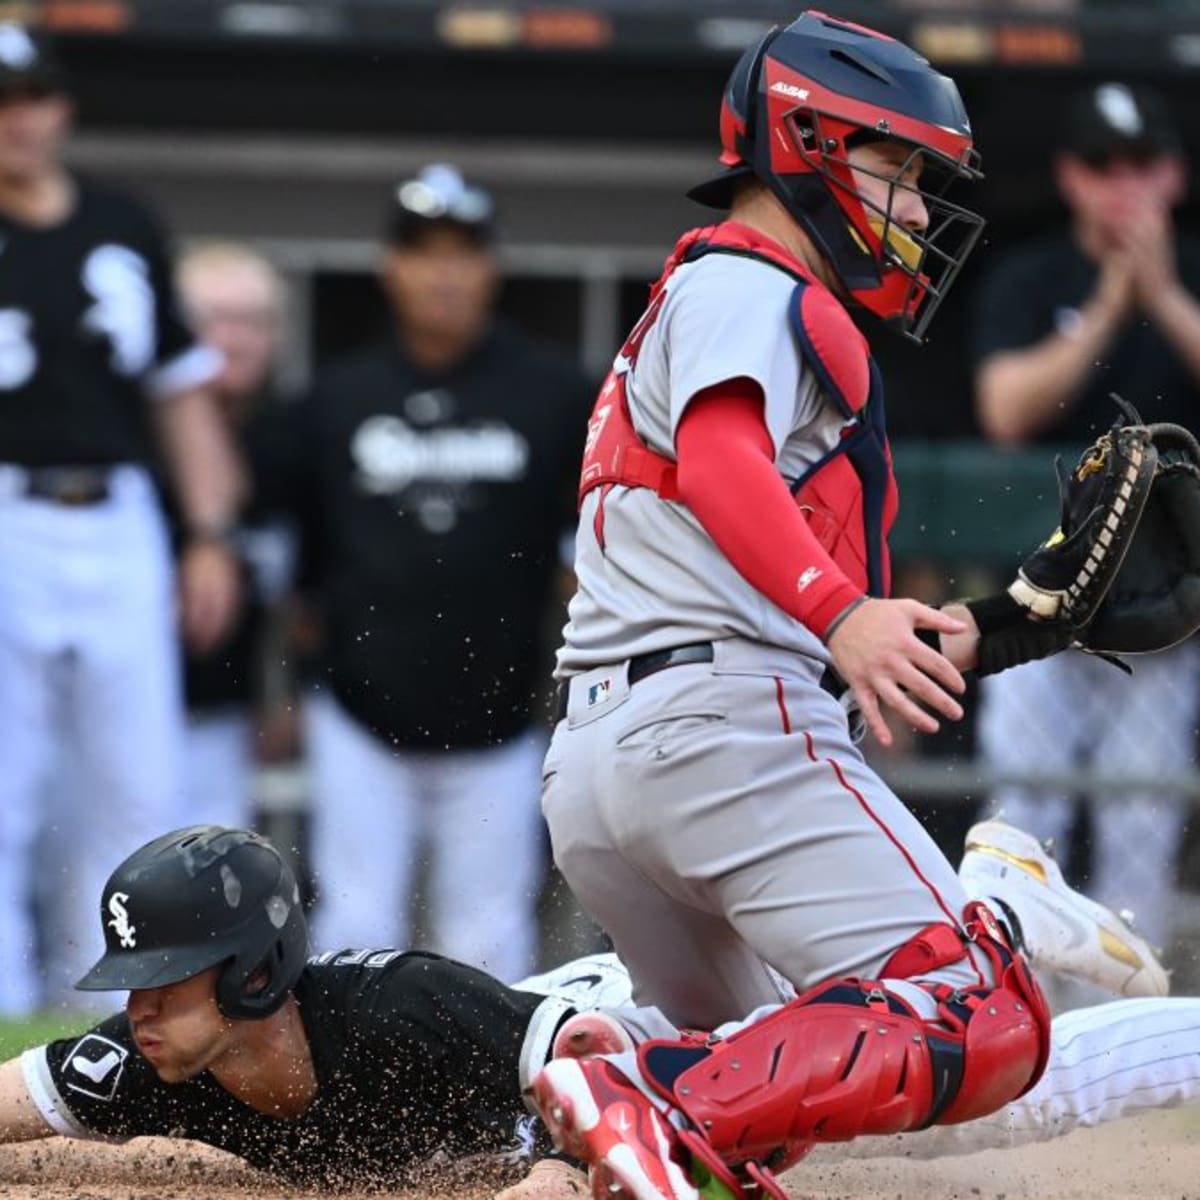 Connor Wong is Becoming One of the Top Catchers in Baseball